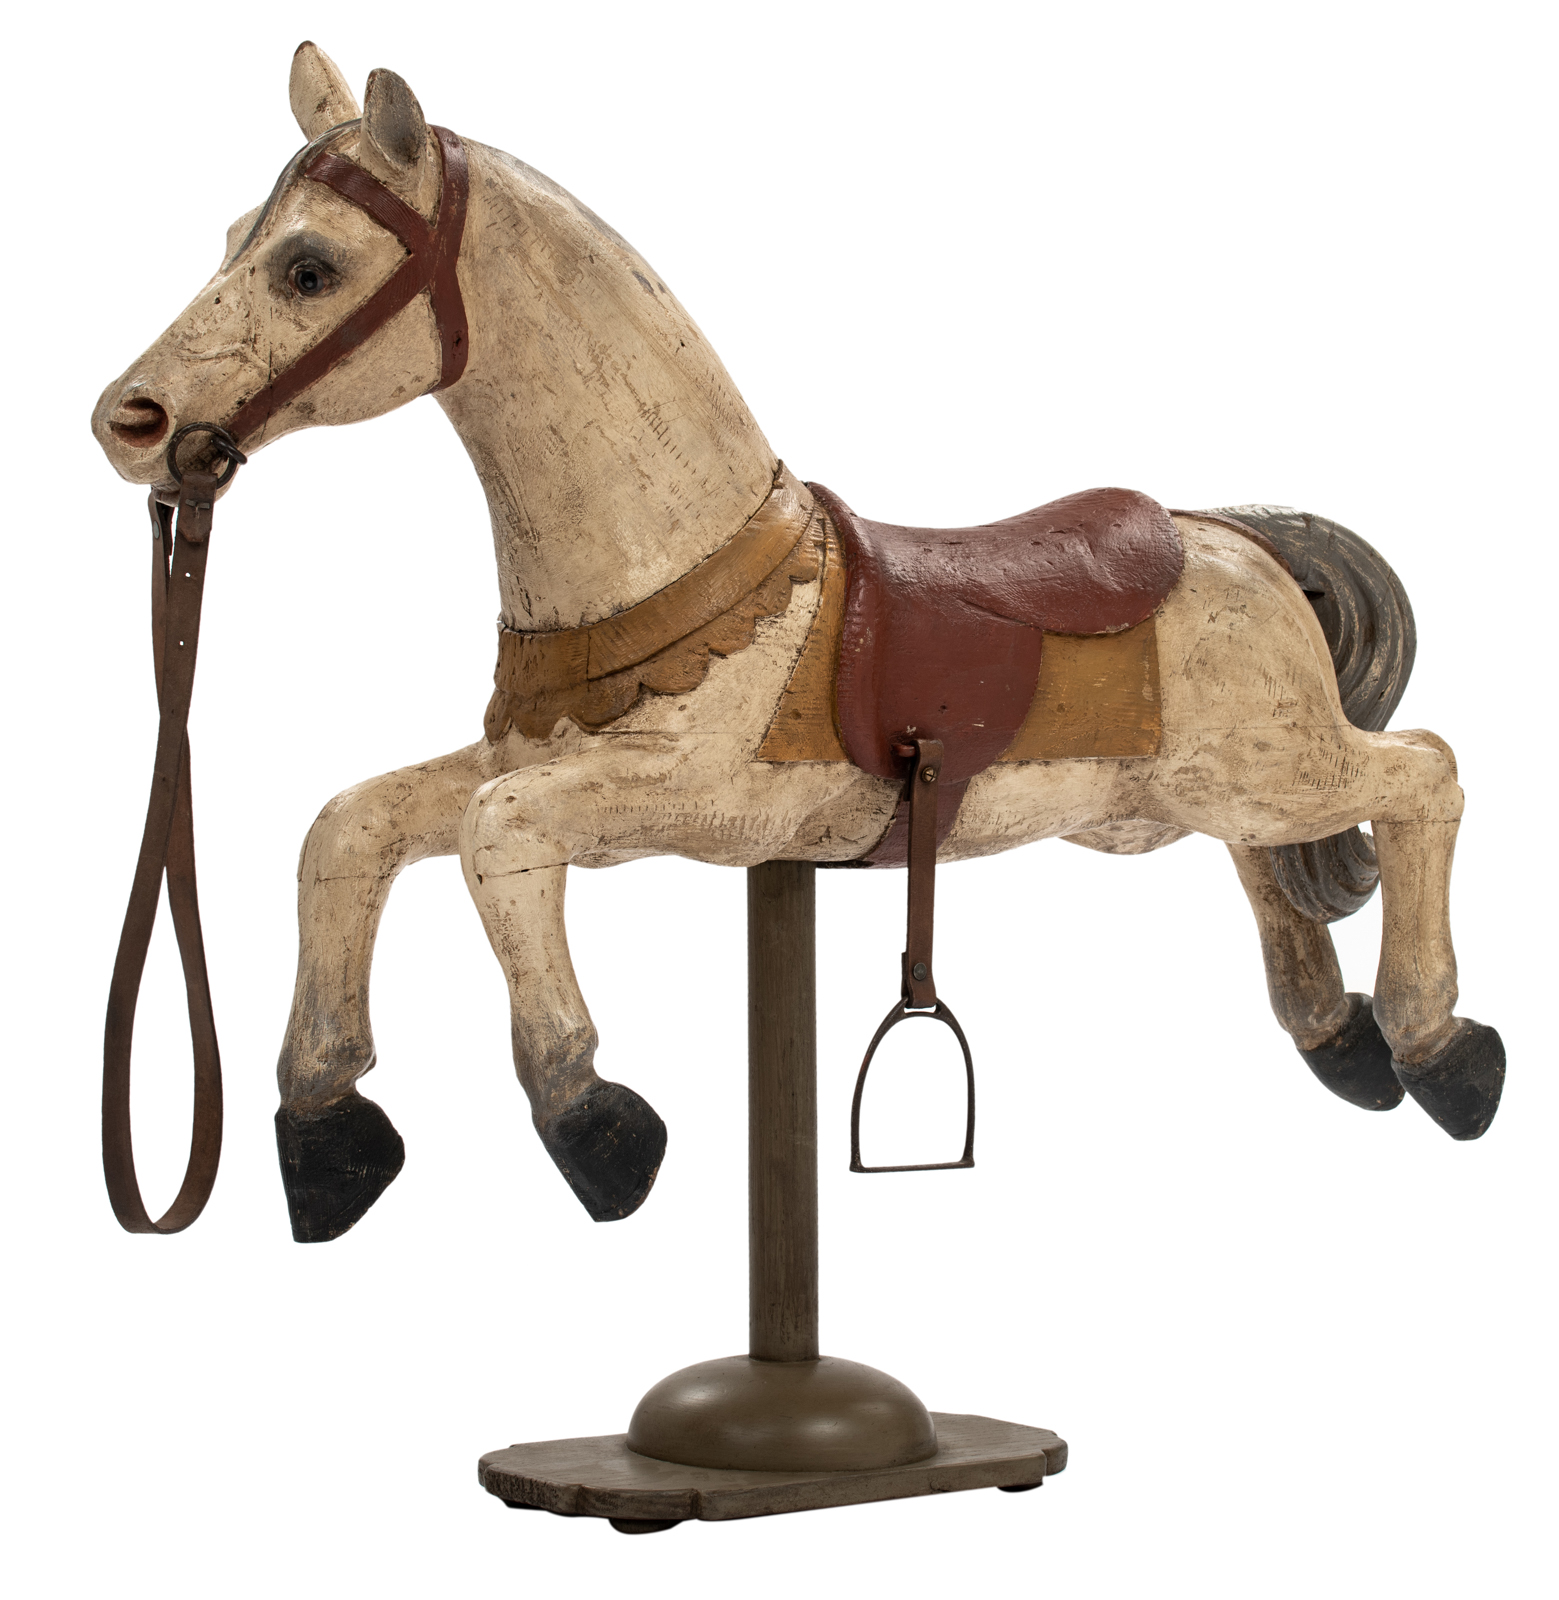 A wooden polychrome painted carousel horse mounted on a recent wooden stand, H (with stand) 138 cm /